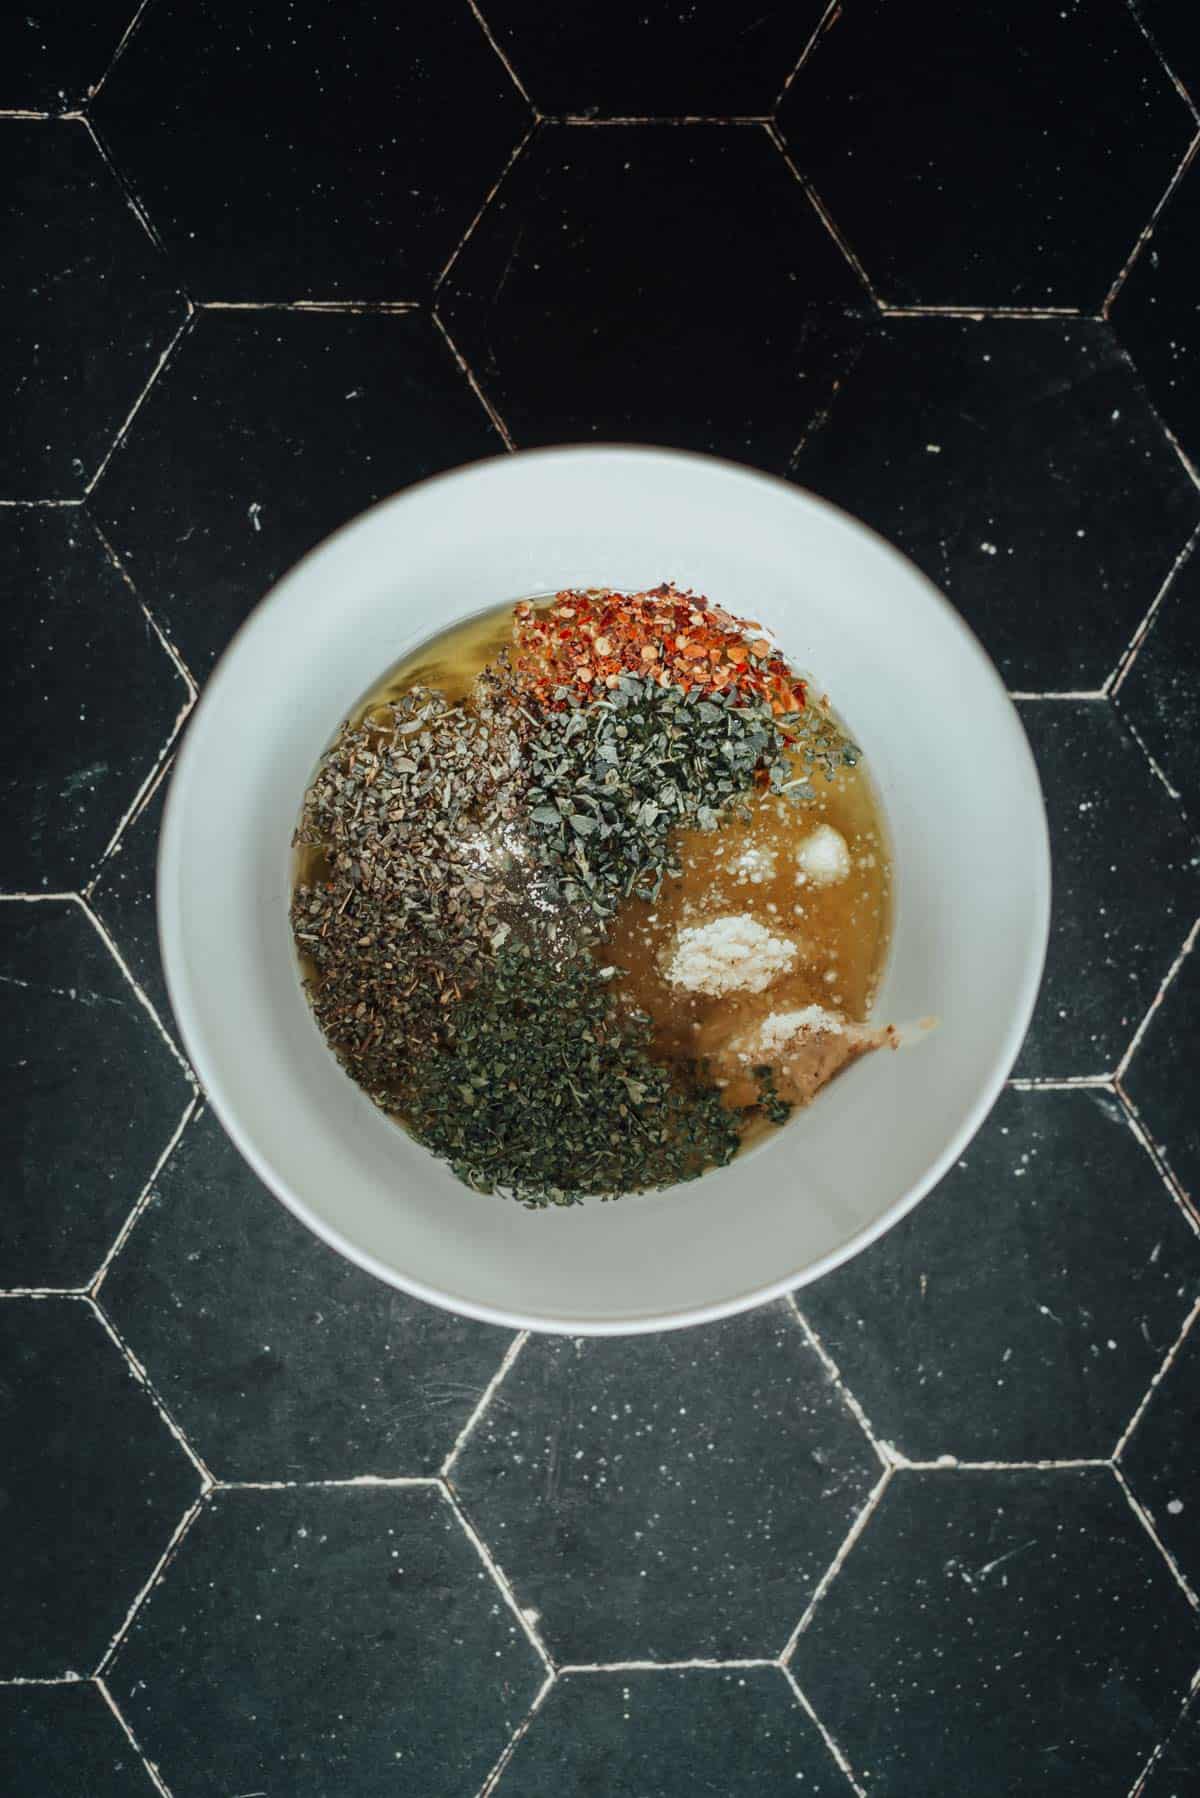 A white bowl on a black hexagon-tiled surface contains various herbs and seasonings pre-mixed together.